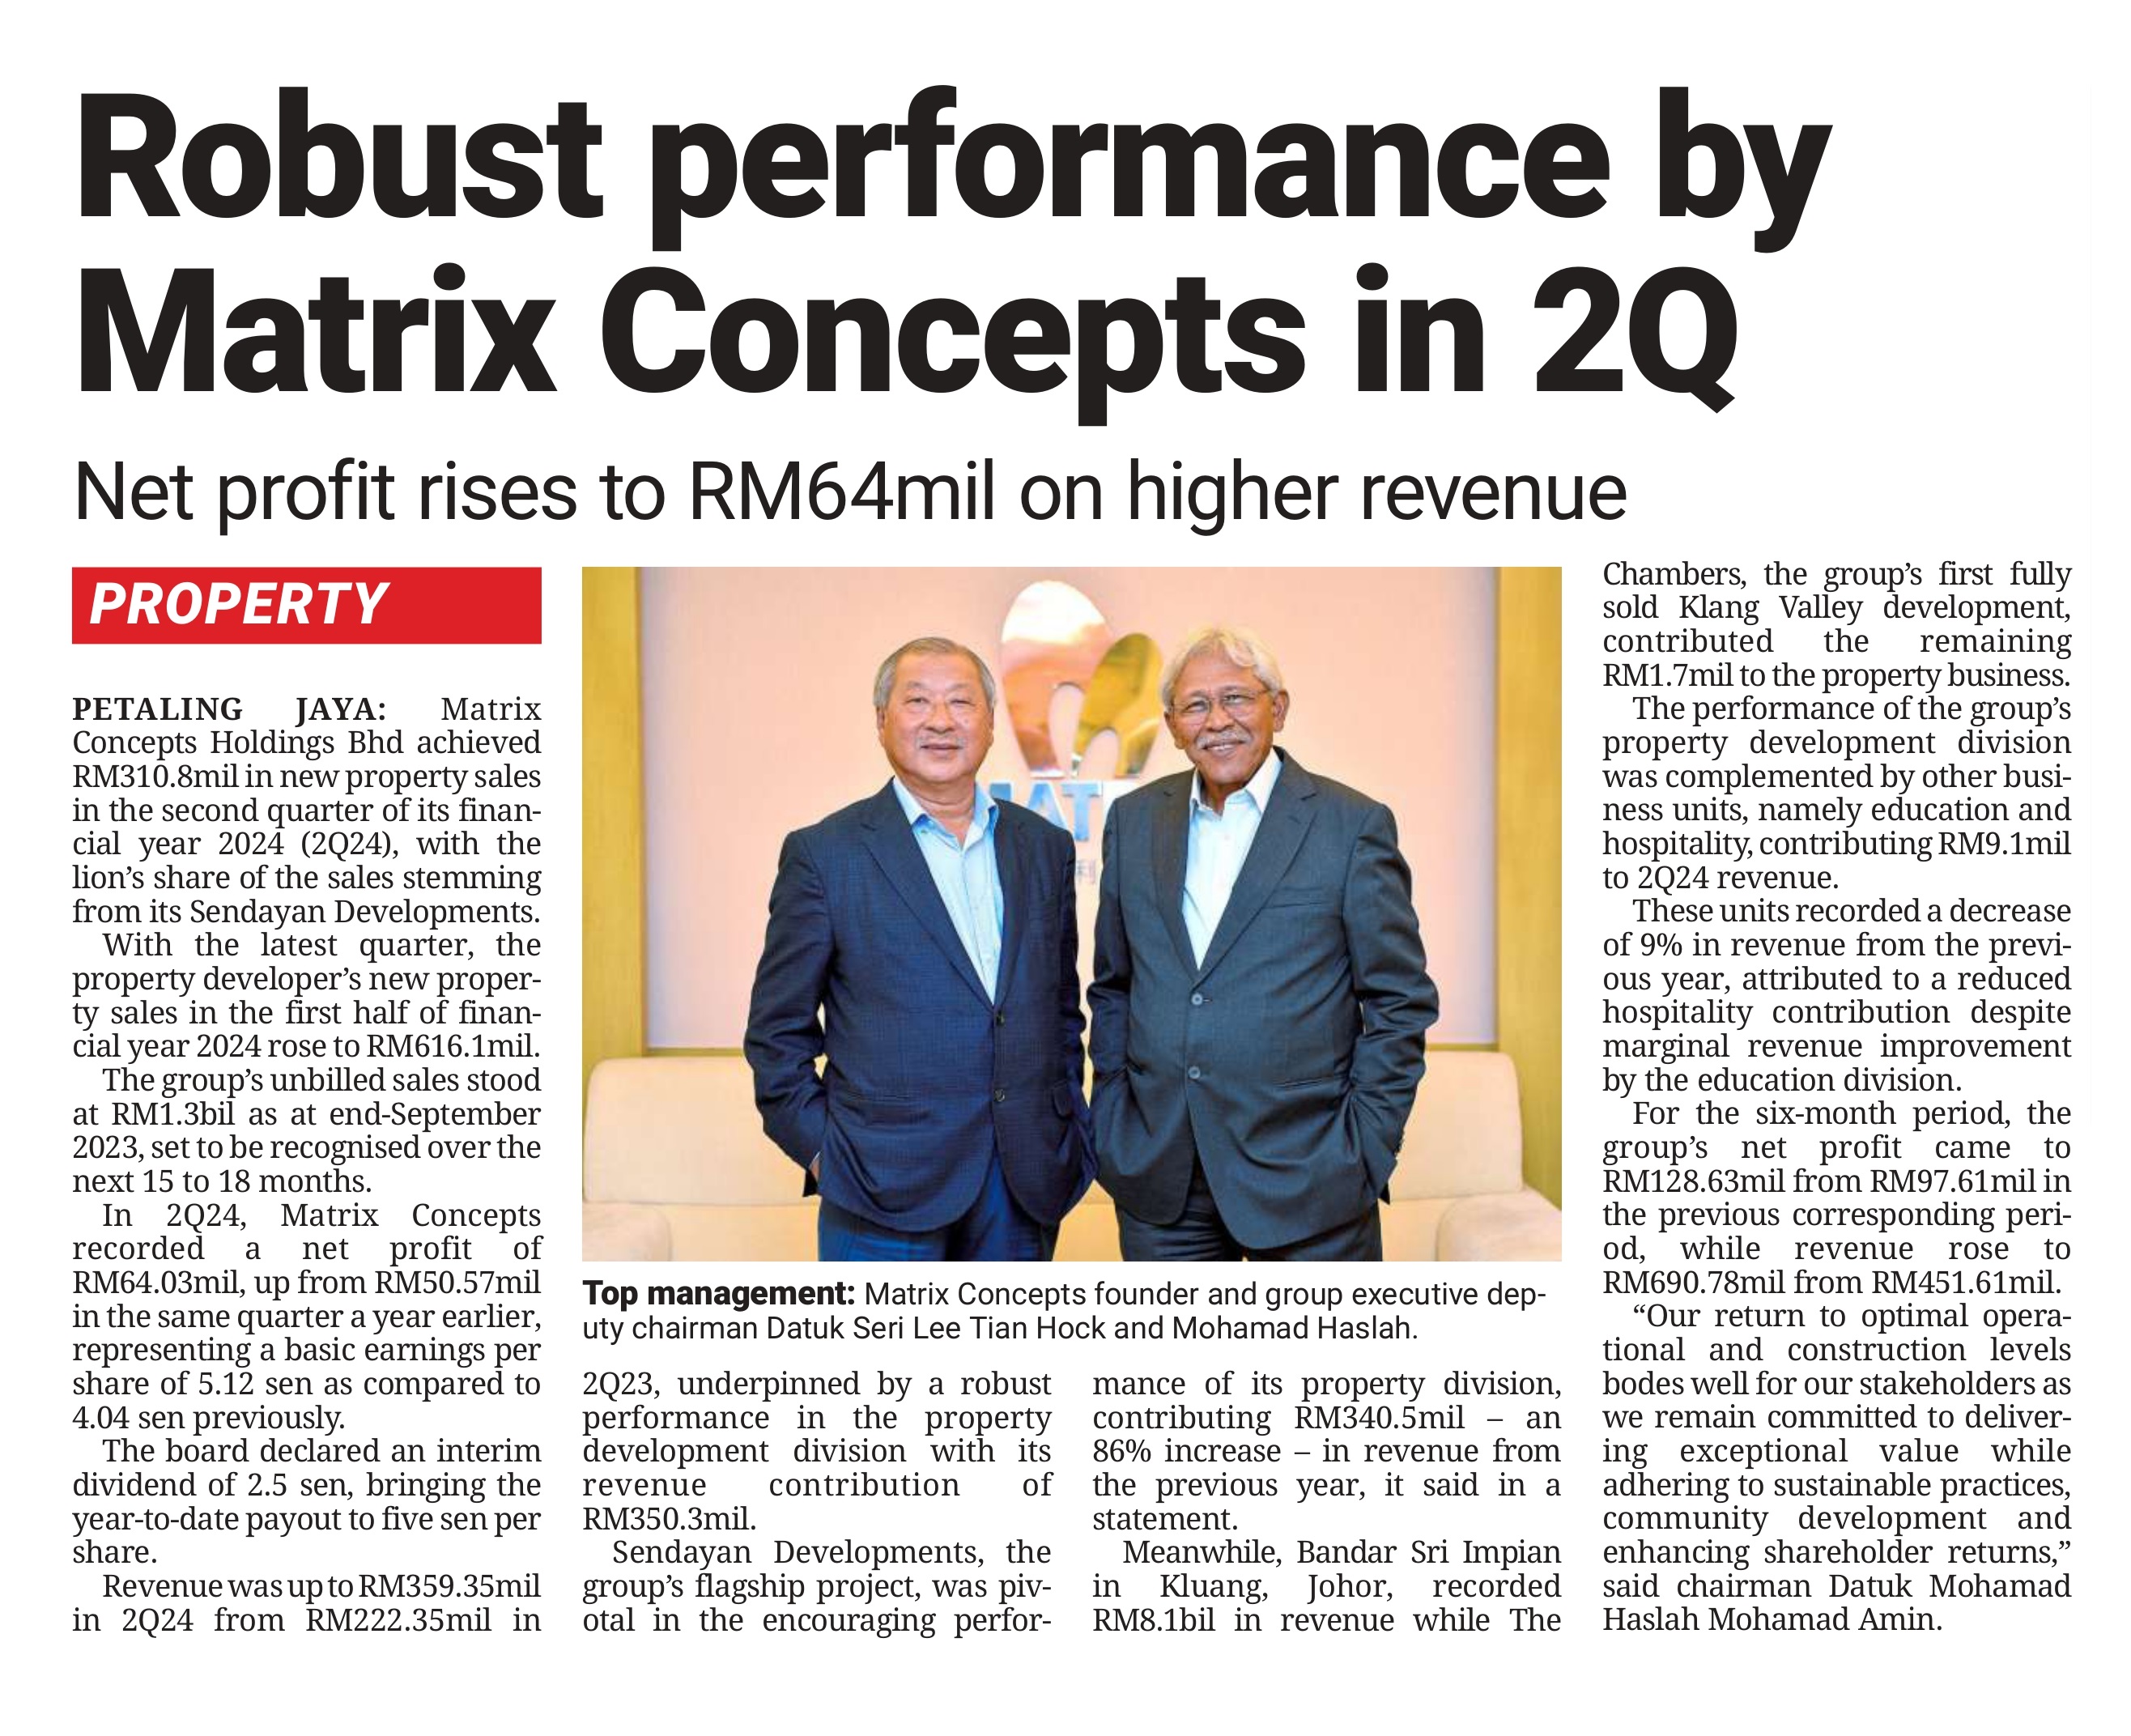 The Star 24 November 2023 Robust Performance By Matrix Concepts In 2Q 